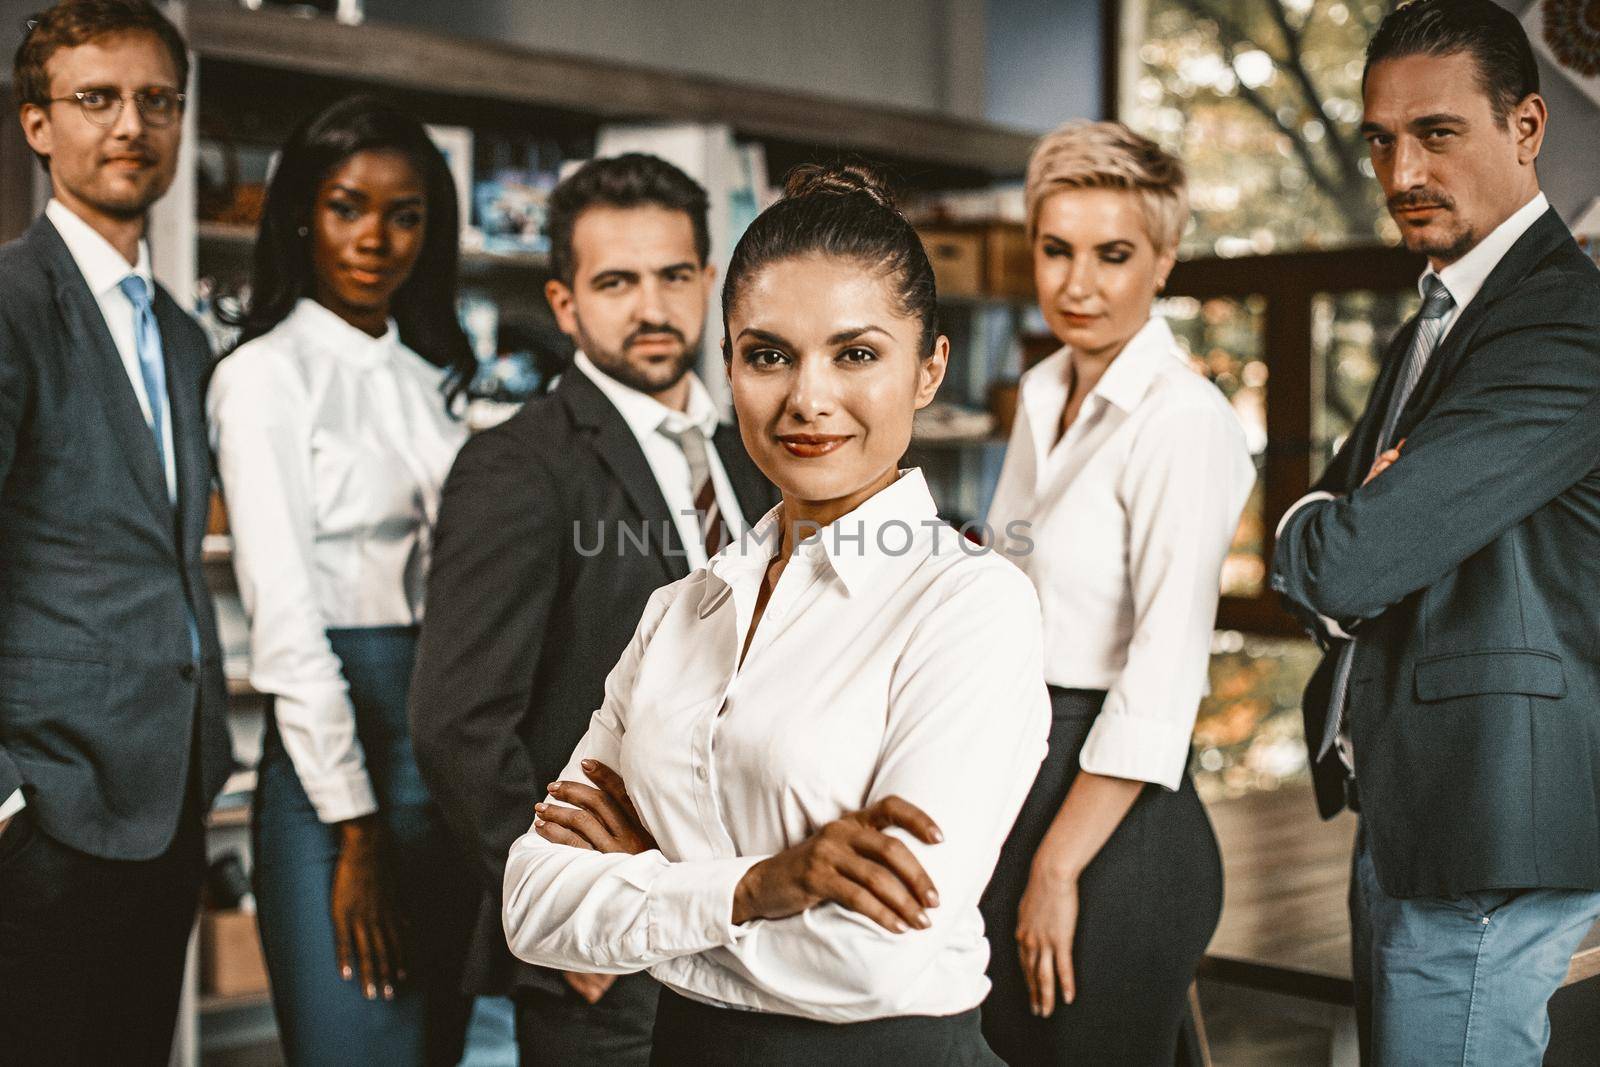 Portrait Of Multiethnic Business Group, Well-Dressed People Stand Posing In Office, Focus On Smiling Woman Standing In Foreground With Crossed Arms, Friendly Diverse Team On Background, Toned Image